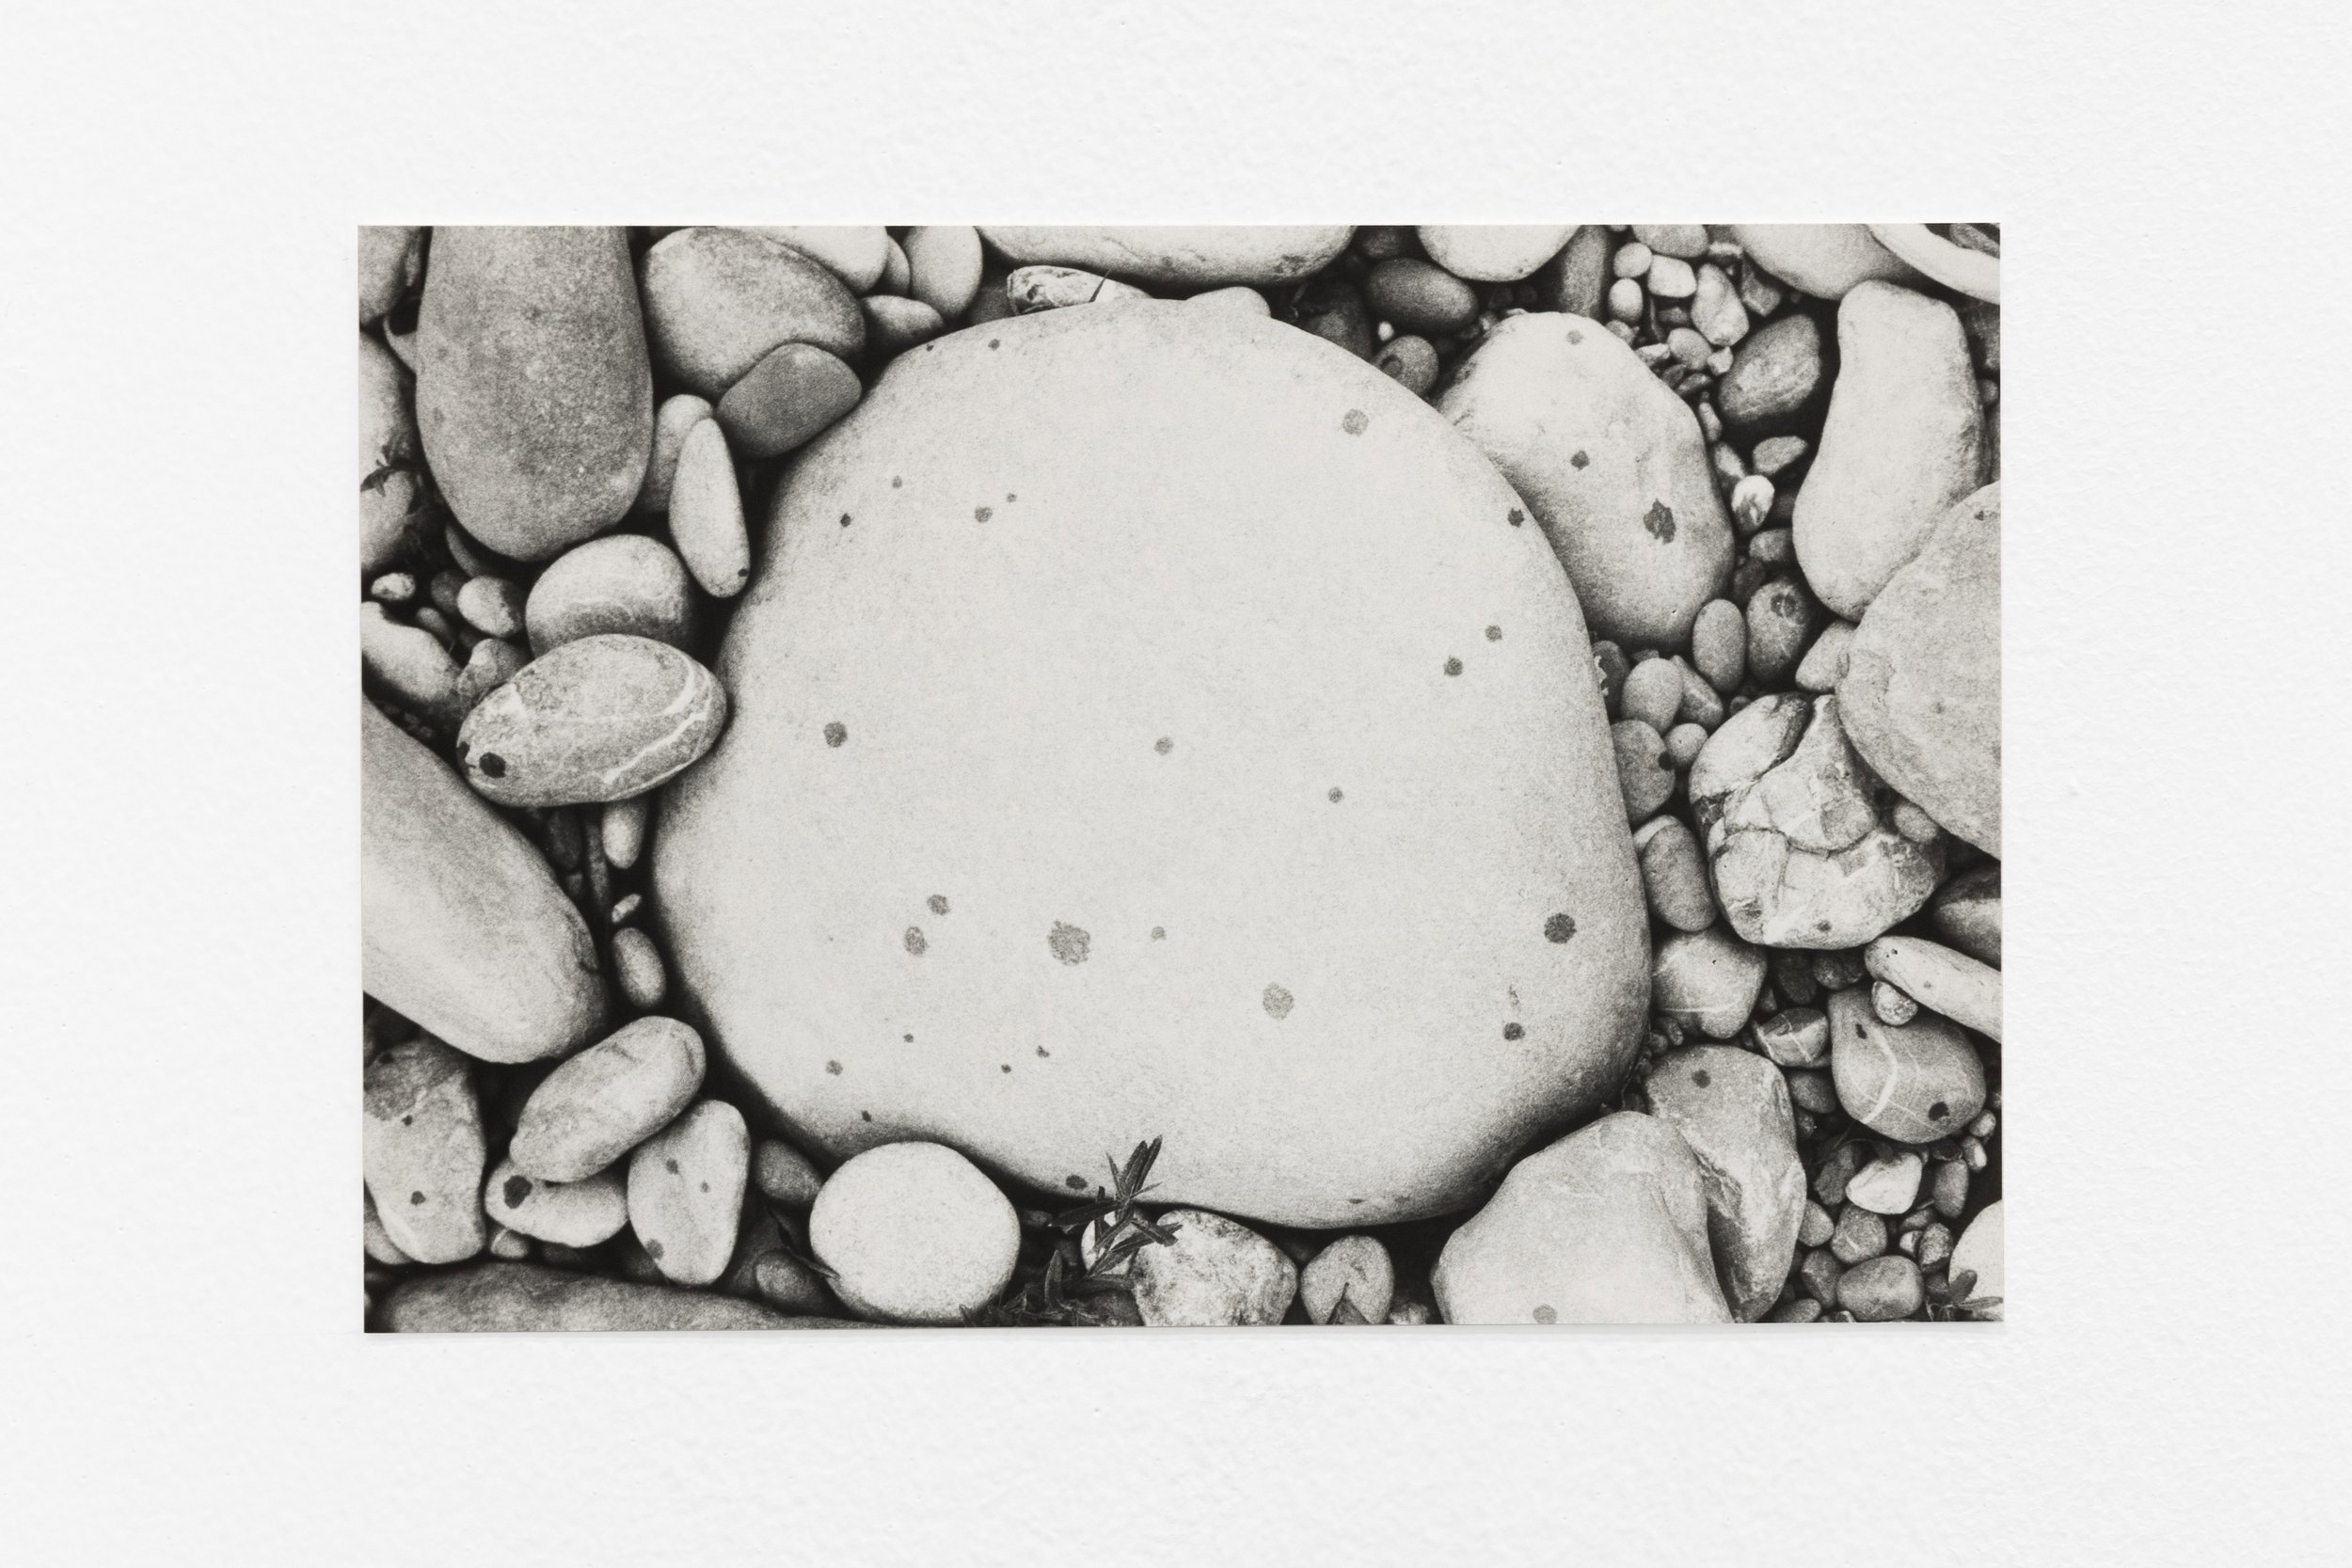  Stone and Drops, 2013, silver gelatin print, 19 x 28 cm, edition 1/5 